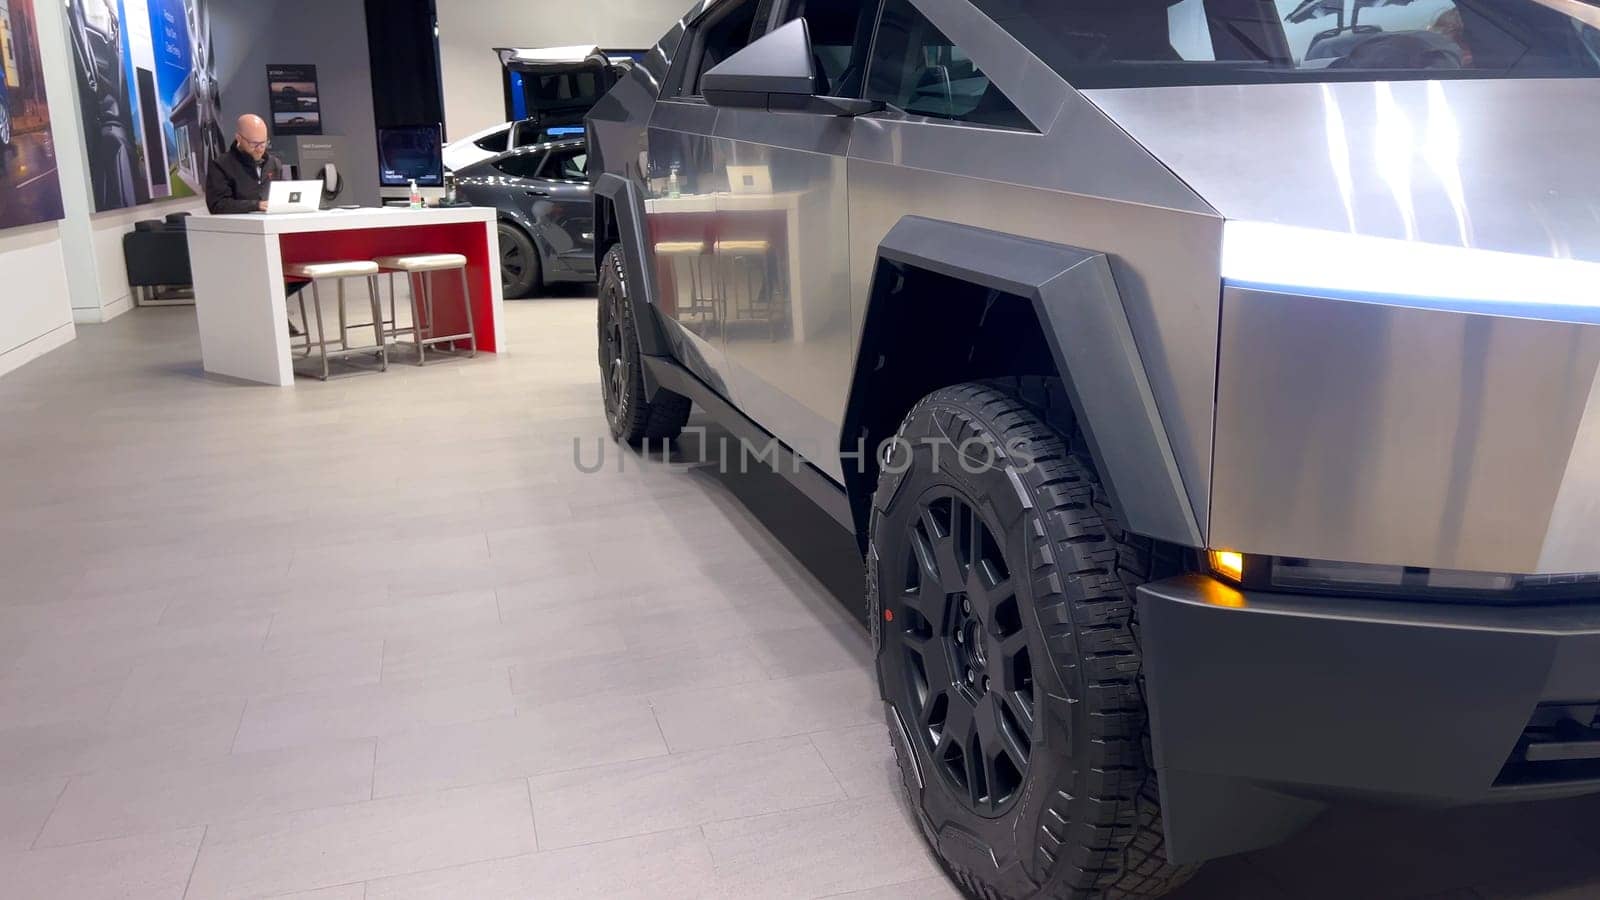 Tesla Cybertruck on Display at Tesla Store in Park Meadows Mall by arinahabich